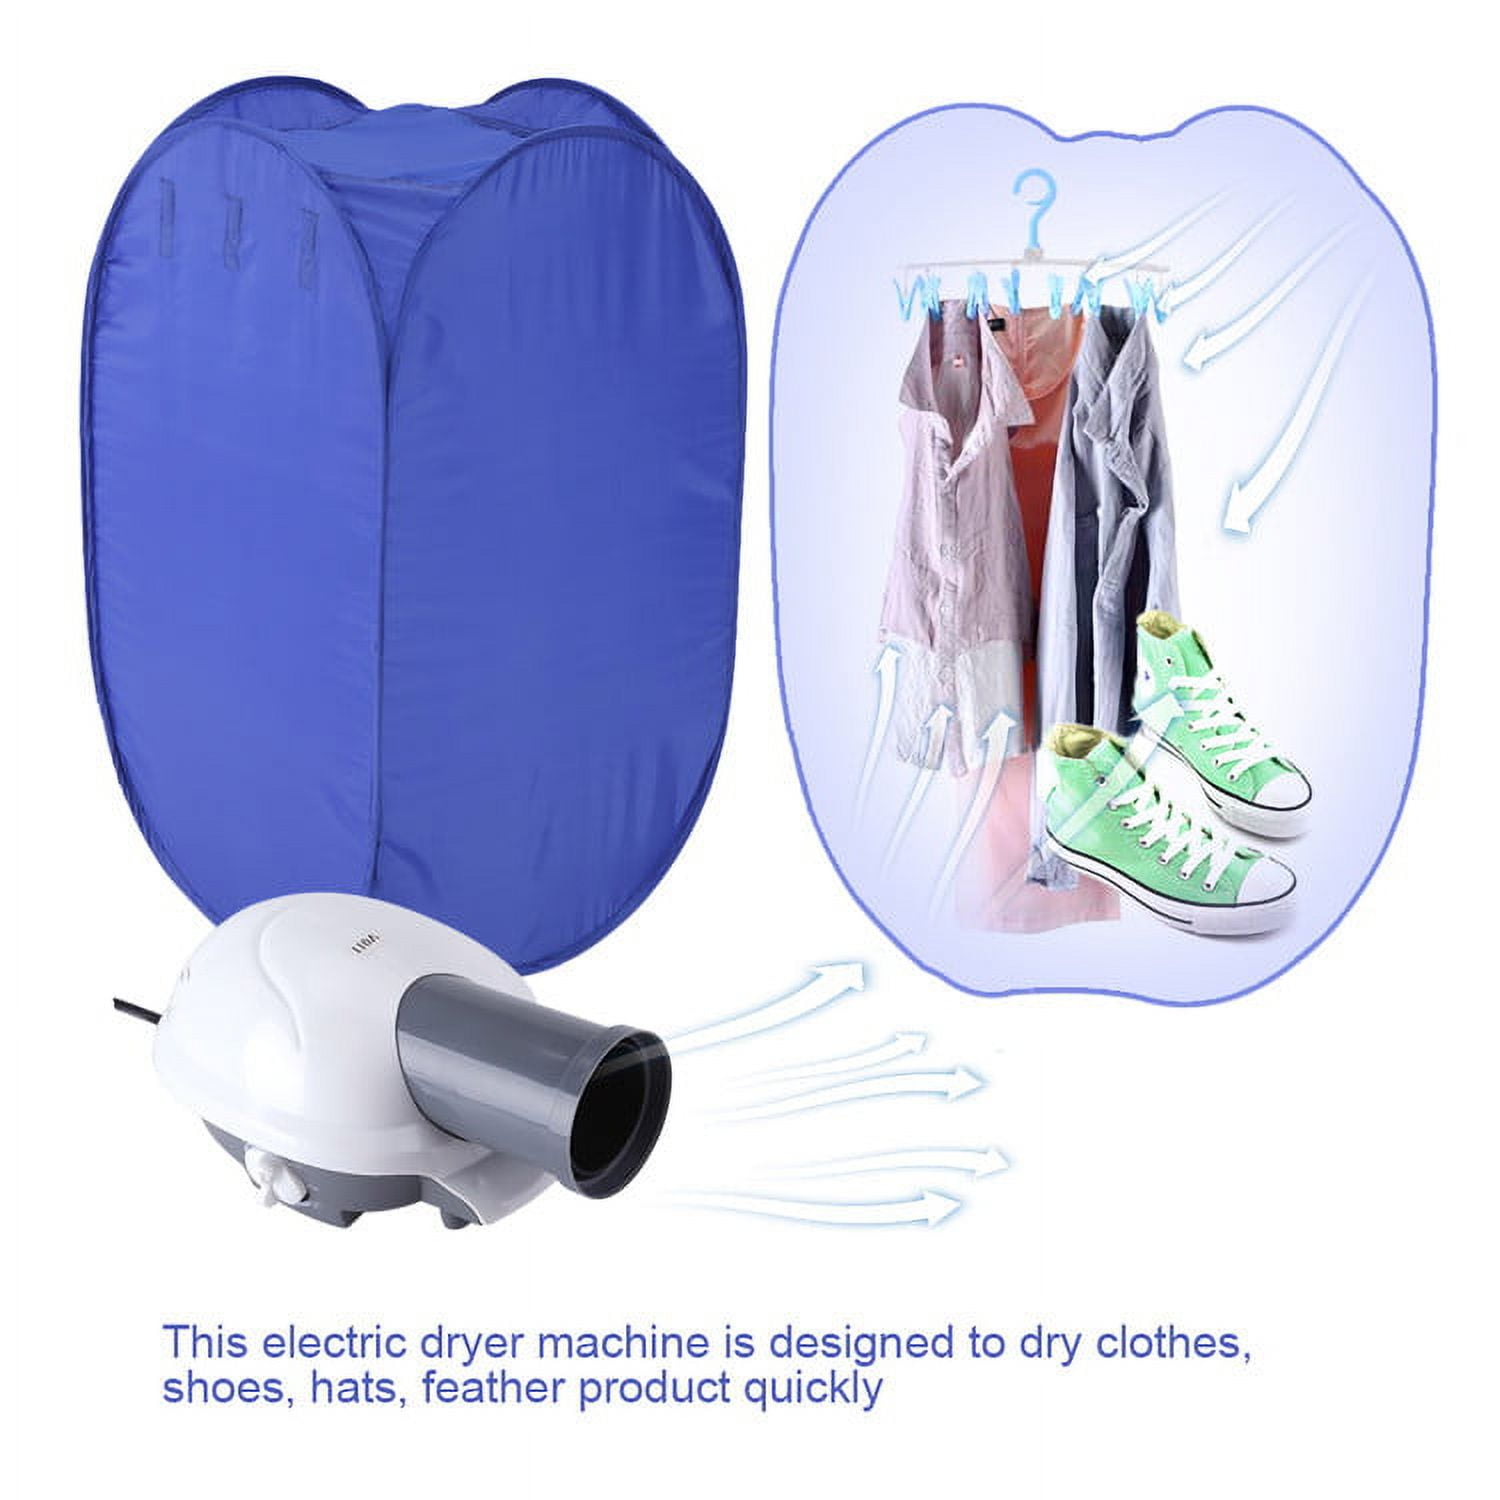 Zimtown Electric Compact Portable Household Clothes Dryer 2.6CUFT,White  110V 4KG